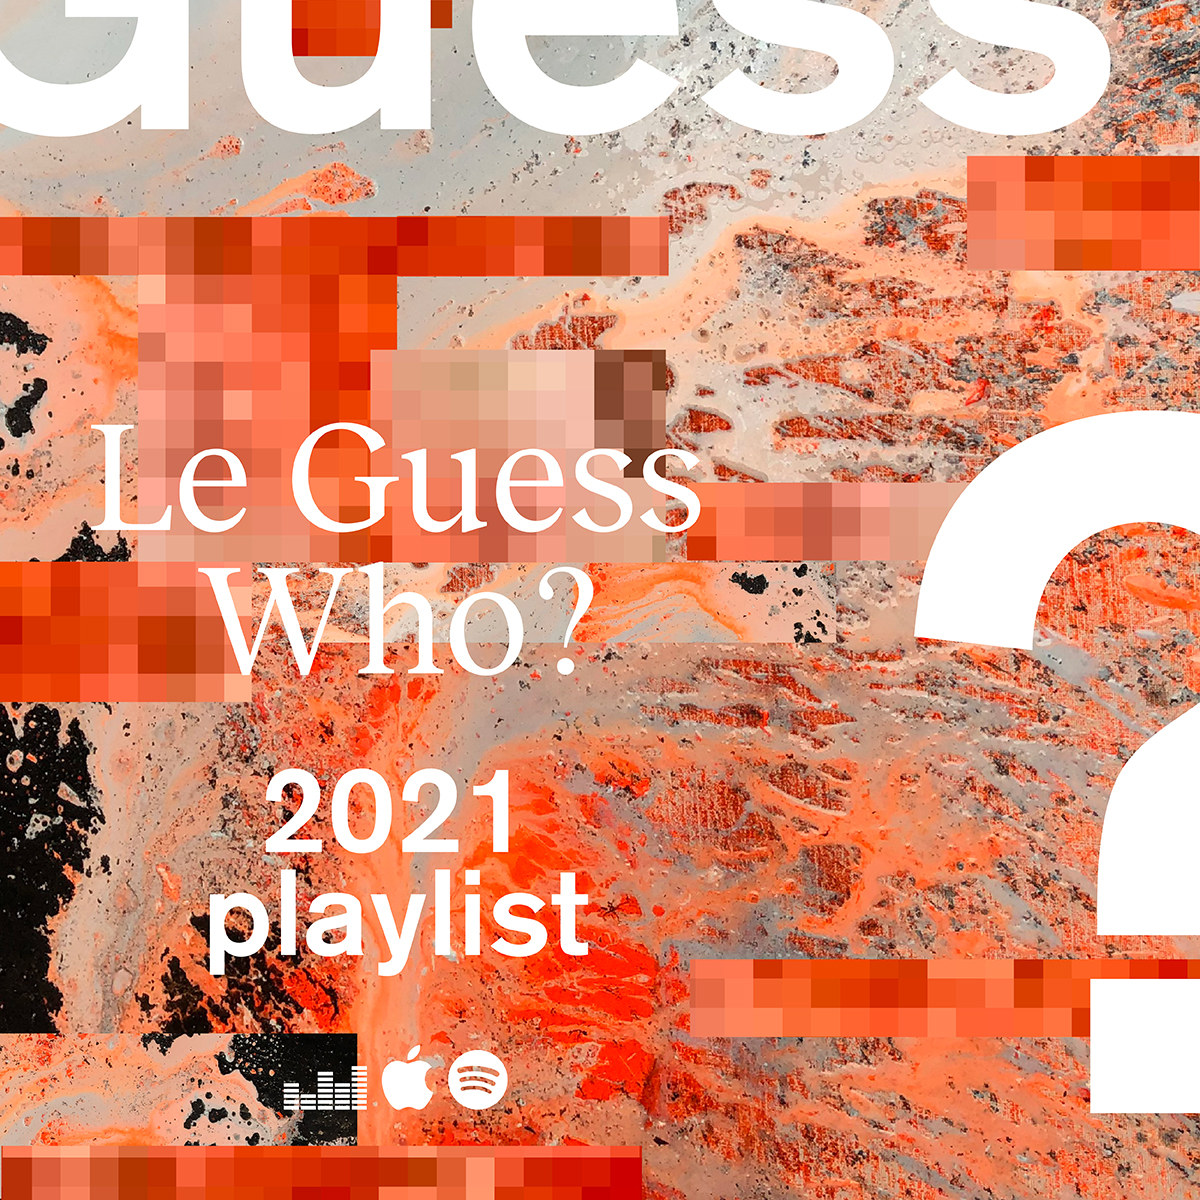 Explore the line-up of Le Guess Who? 2021 with our official playlist